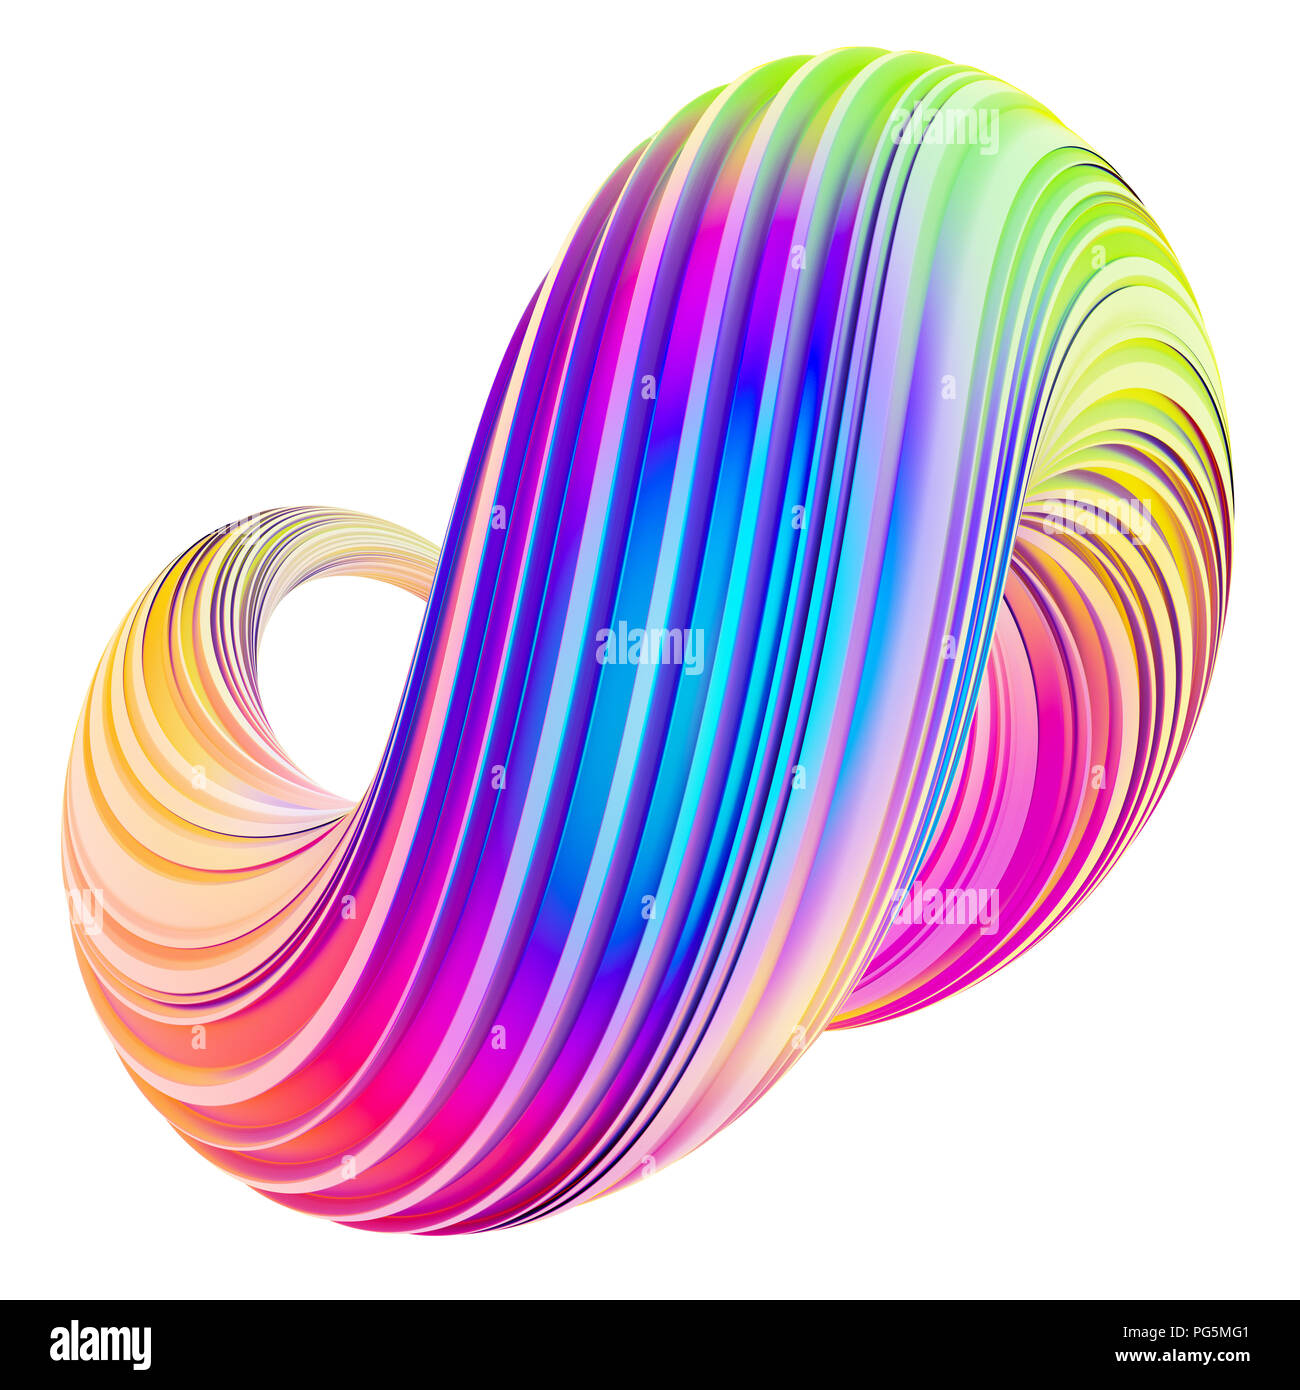 Holographic trendy abstract twisted shape design element. Stock Photo